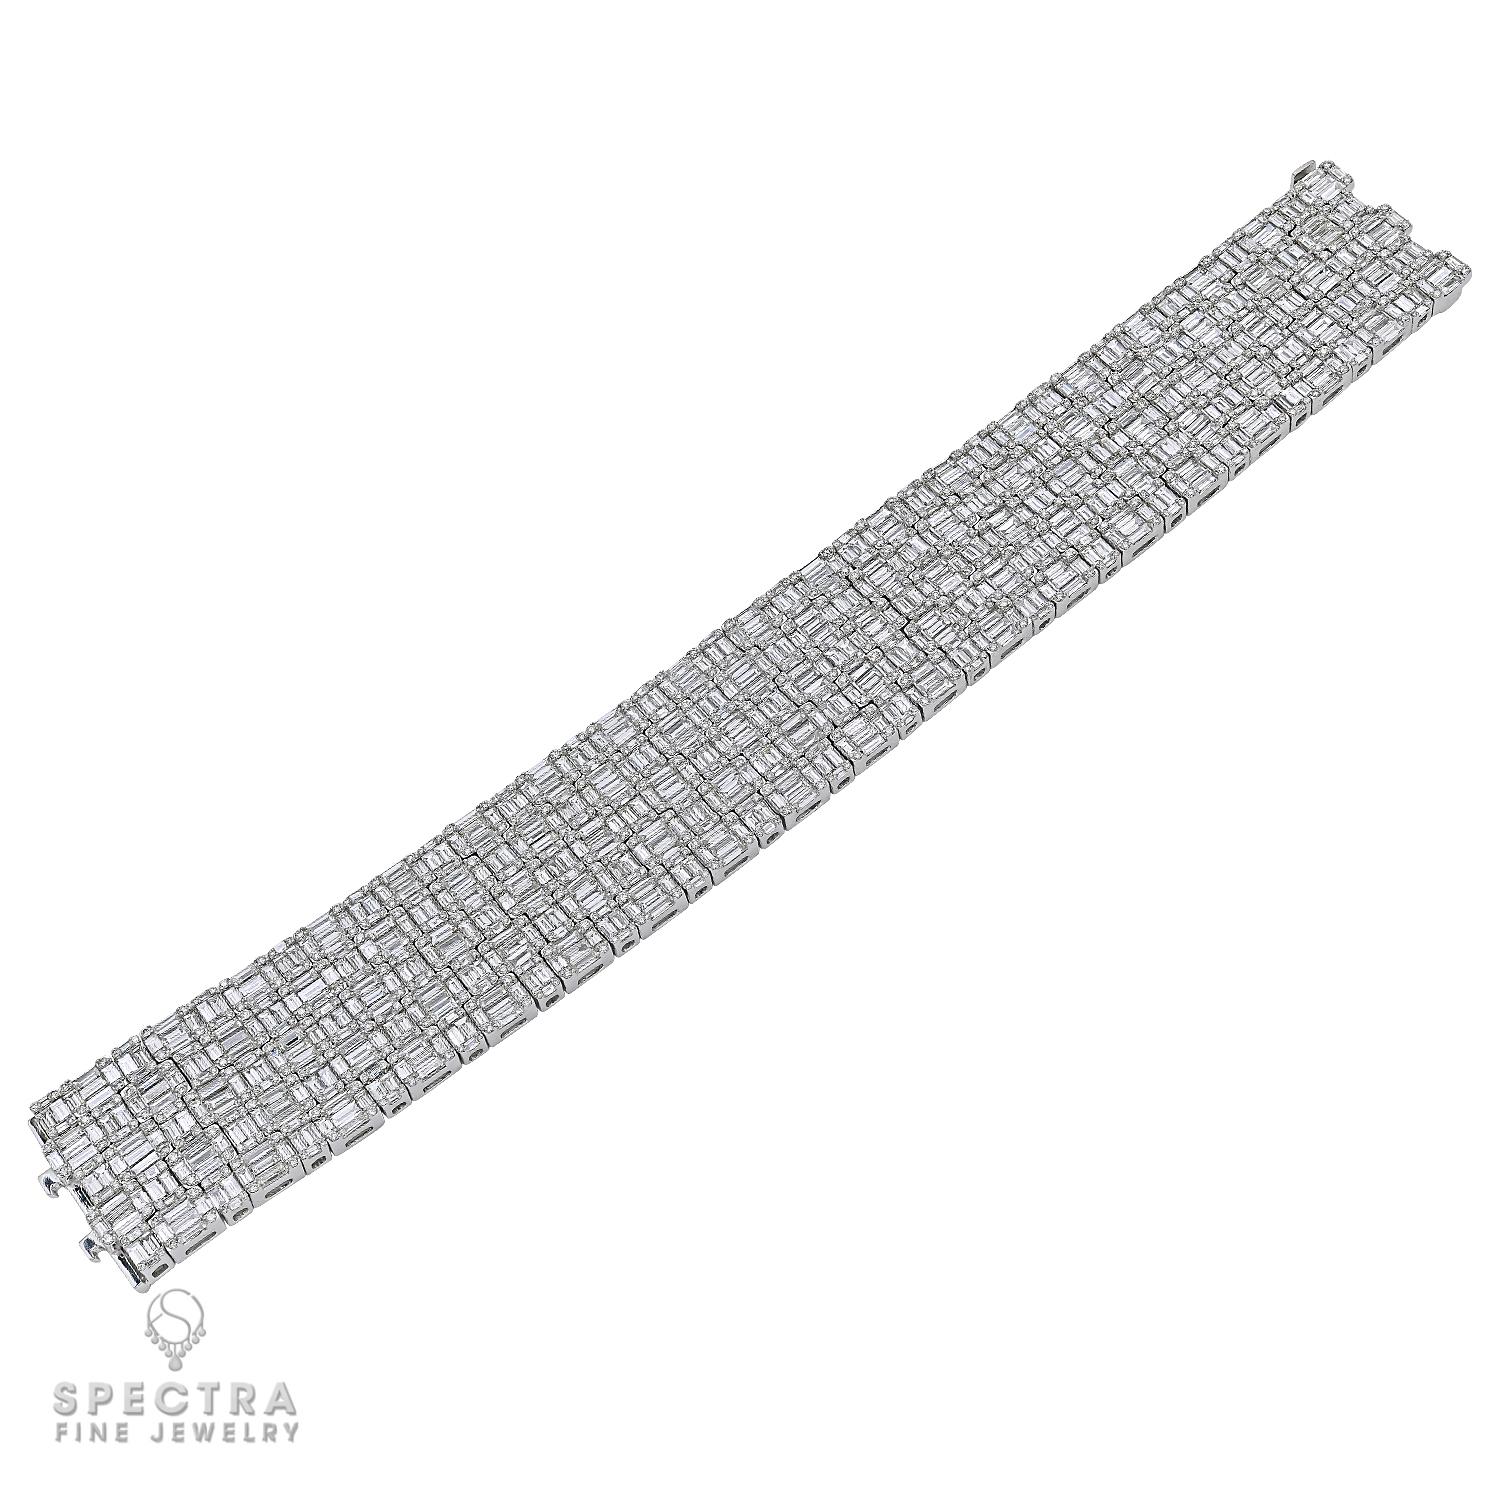 Experience the elegance of this Contemporary Diamond Bracelet - a manifestation of graceful flexibility made by Spectra Fine Jewelry. This sophisticated piece, reminiscent of opulent Art Deco-era bracelets, combines minimalism and modernity with its